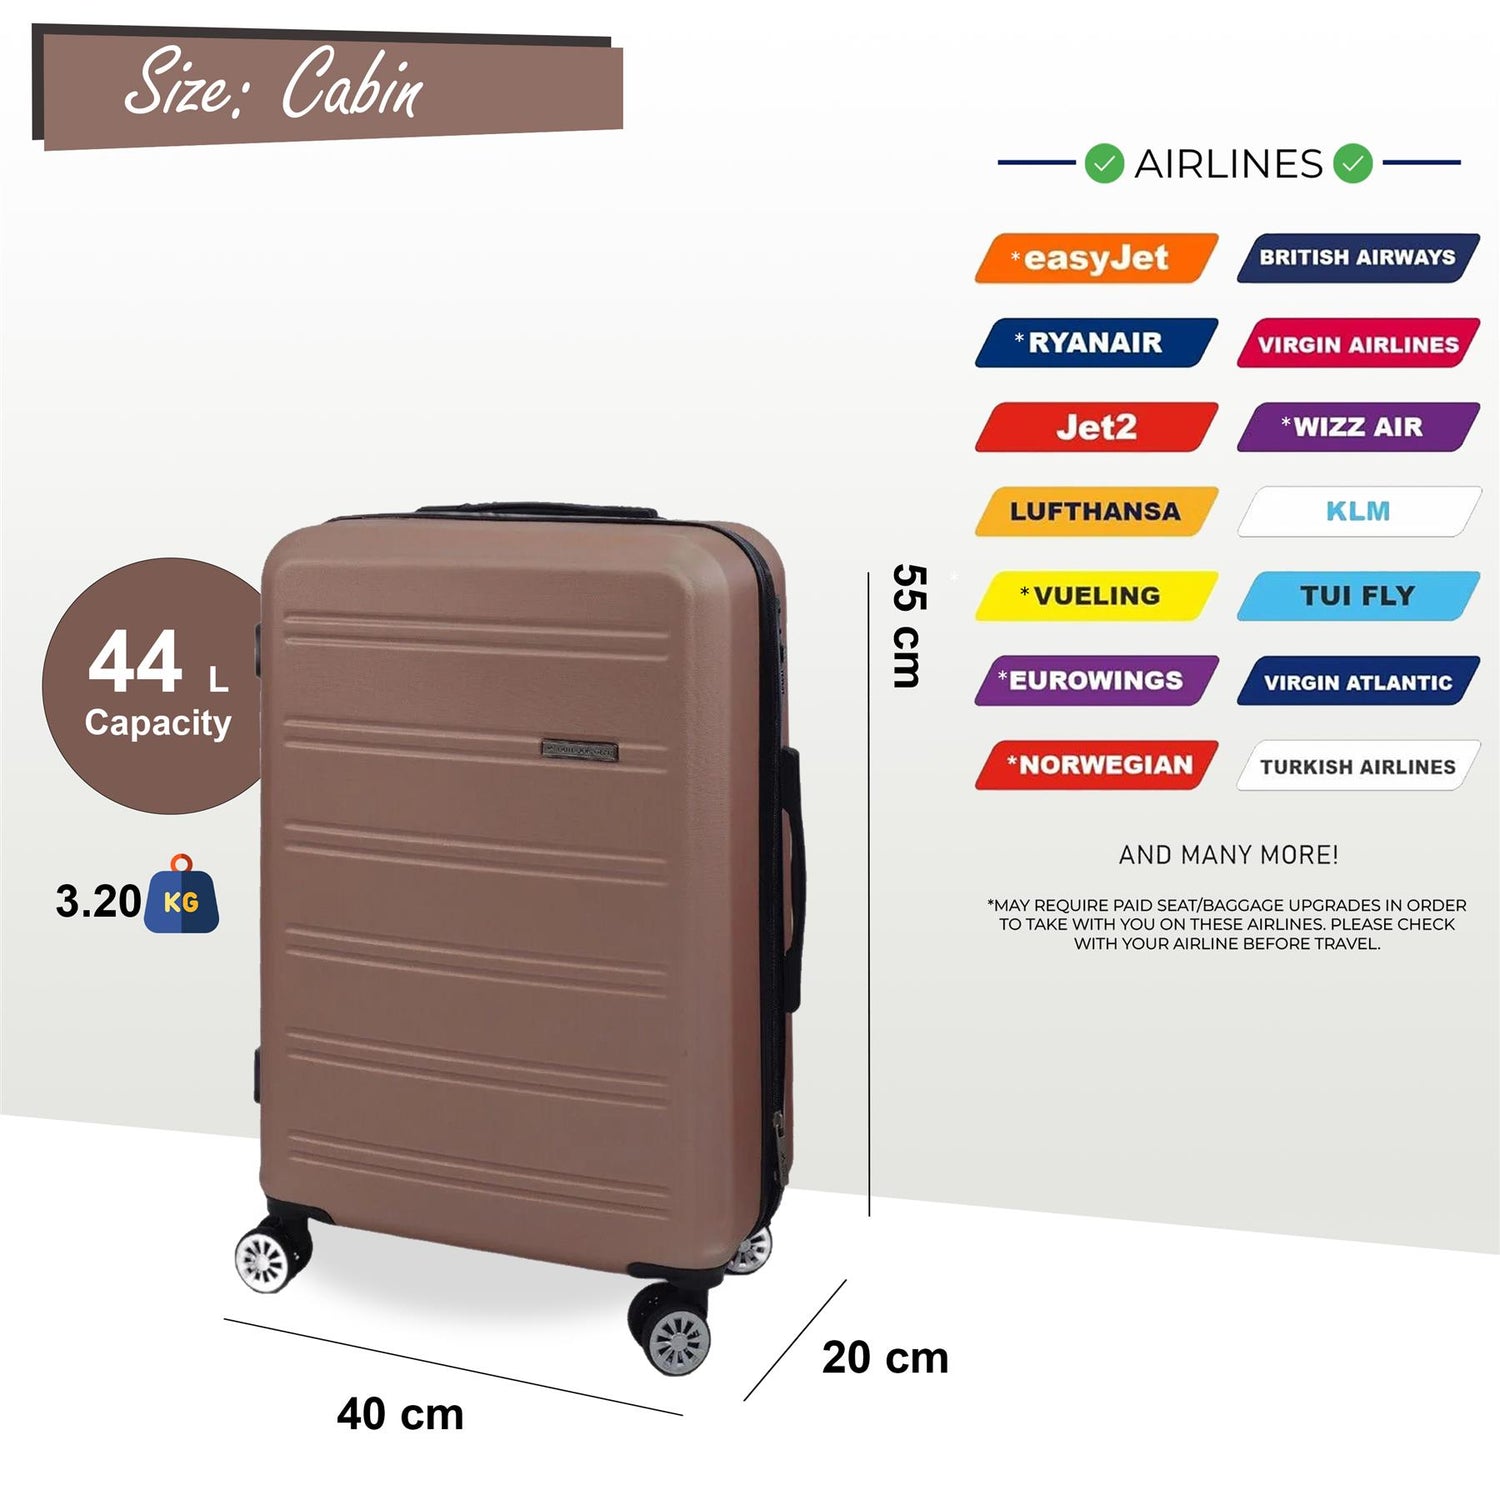 Alabaster Cabin Hard Shell Suitcase in Rose Gold